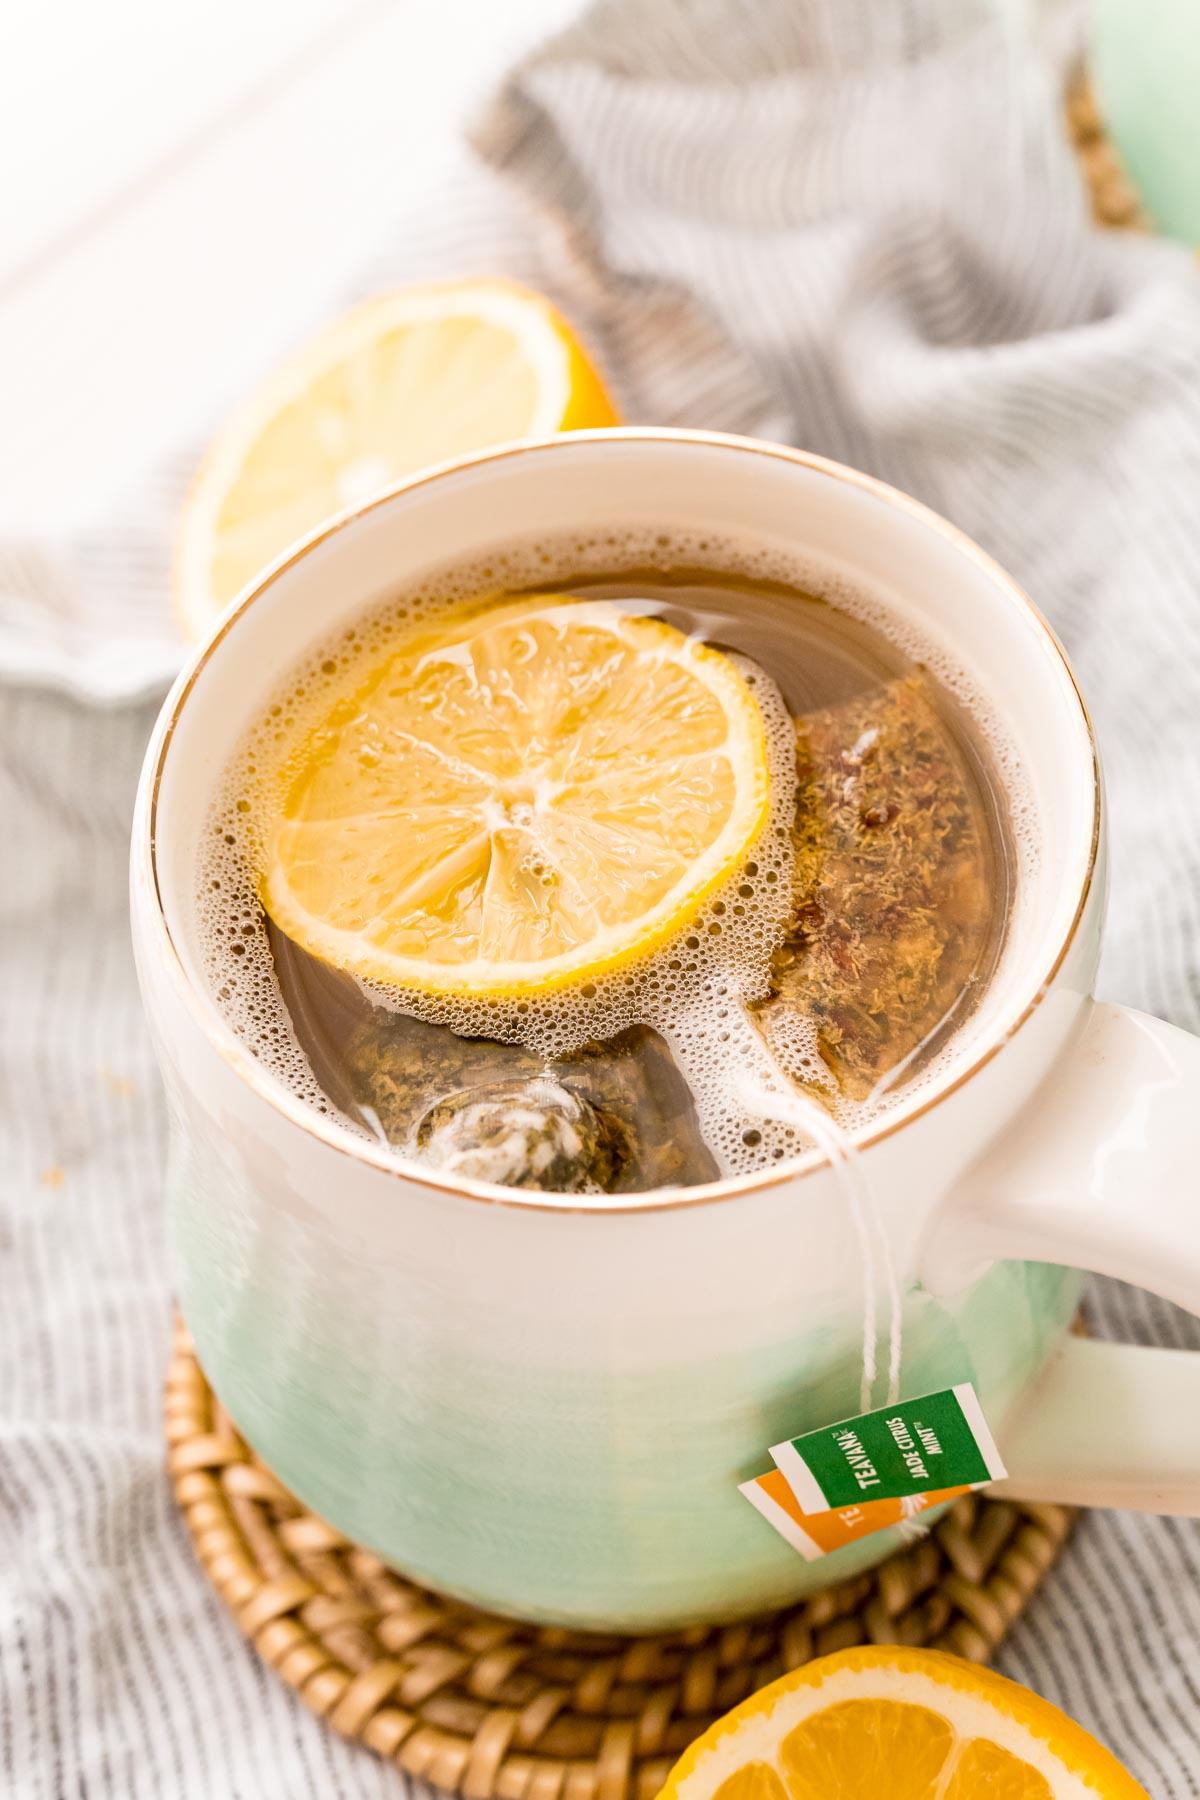 Close up photo of a mug with tea and lemonade in it.